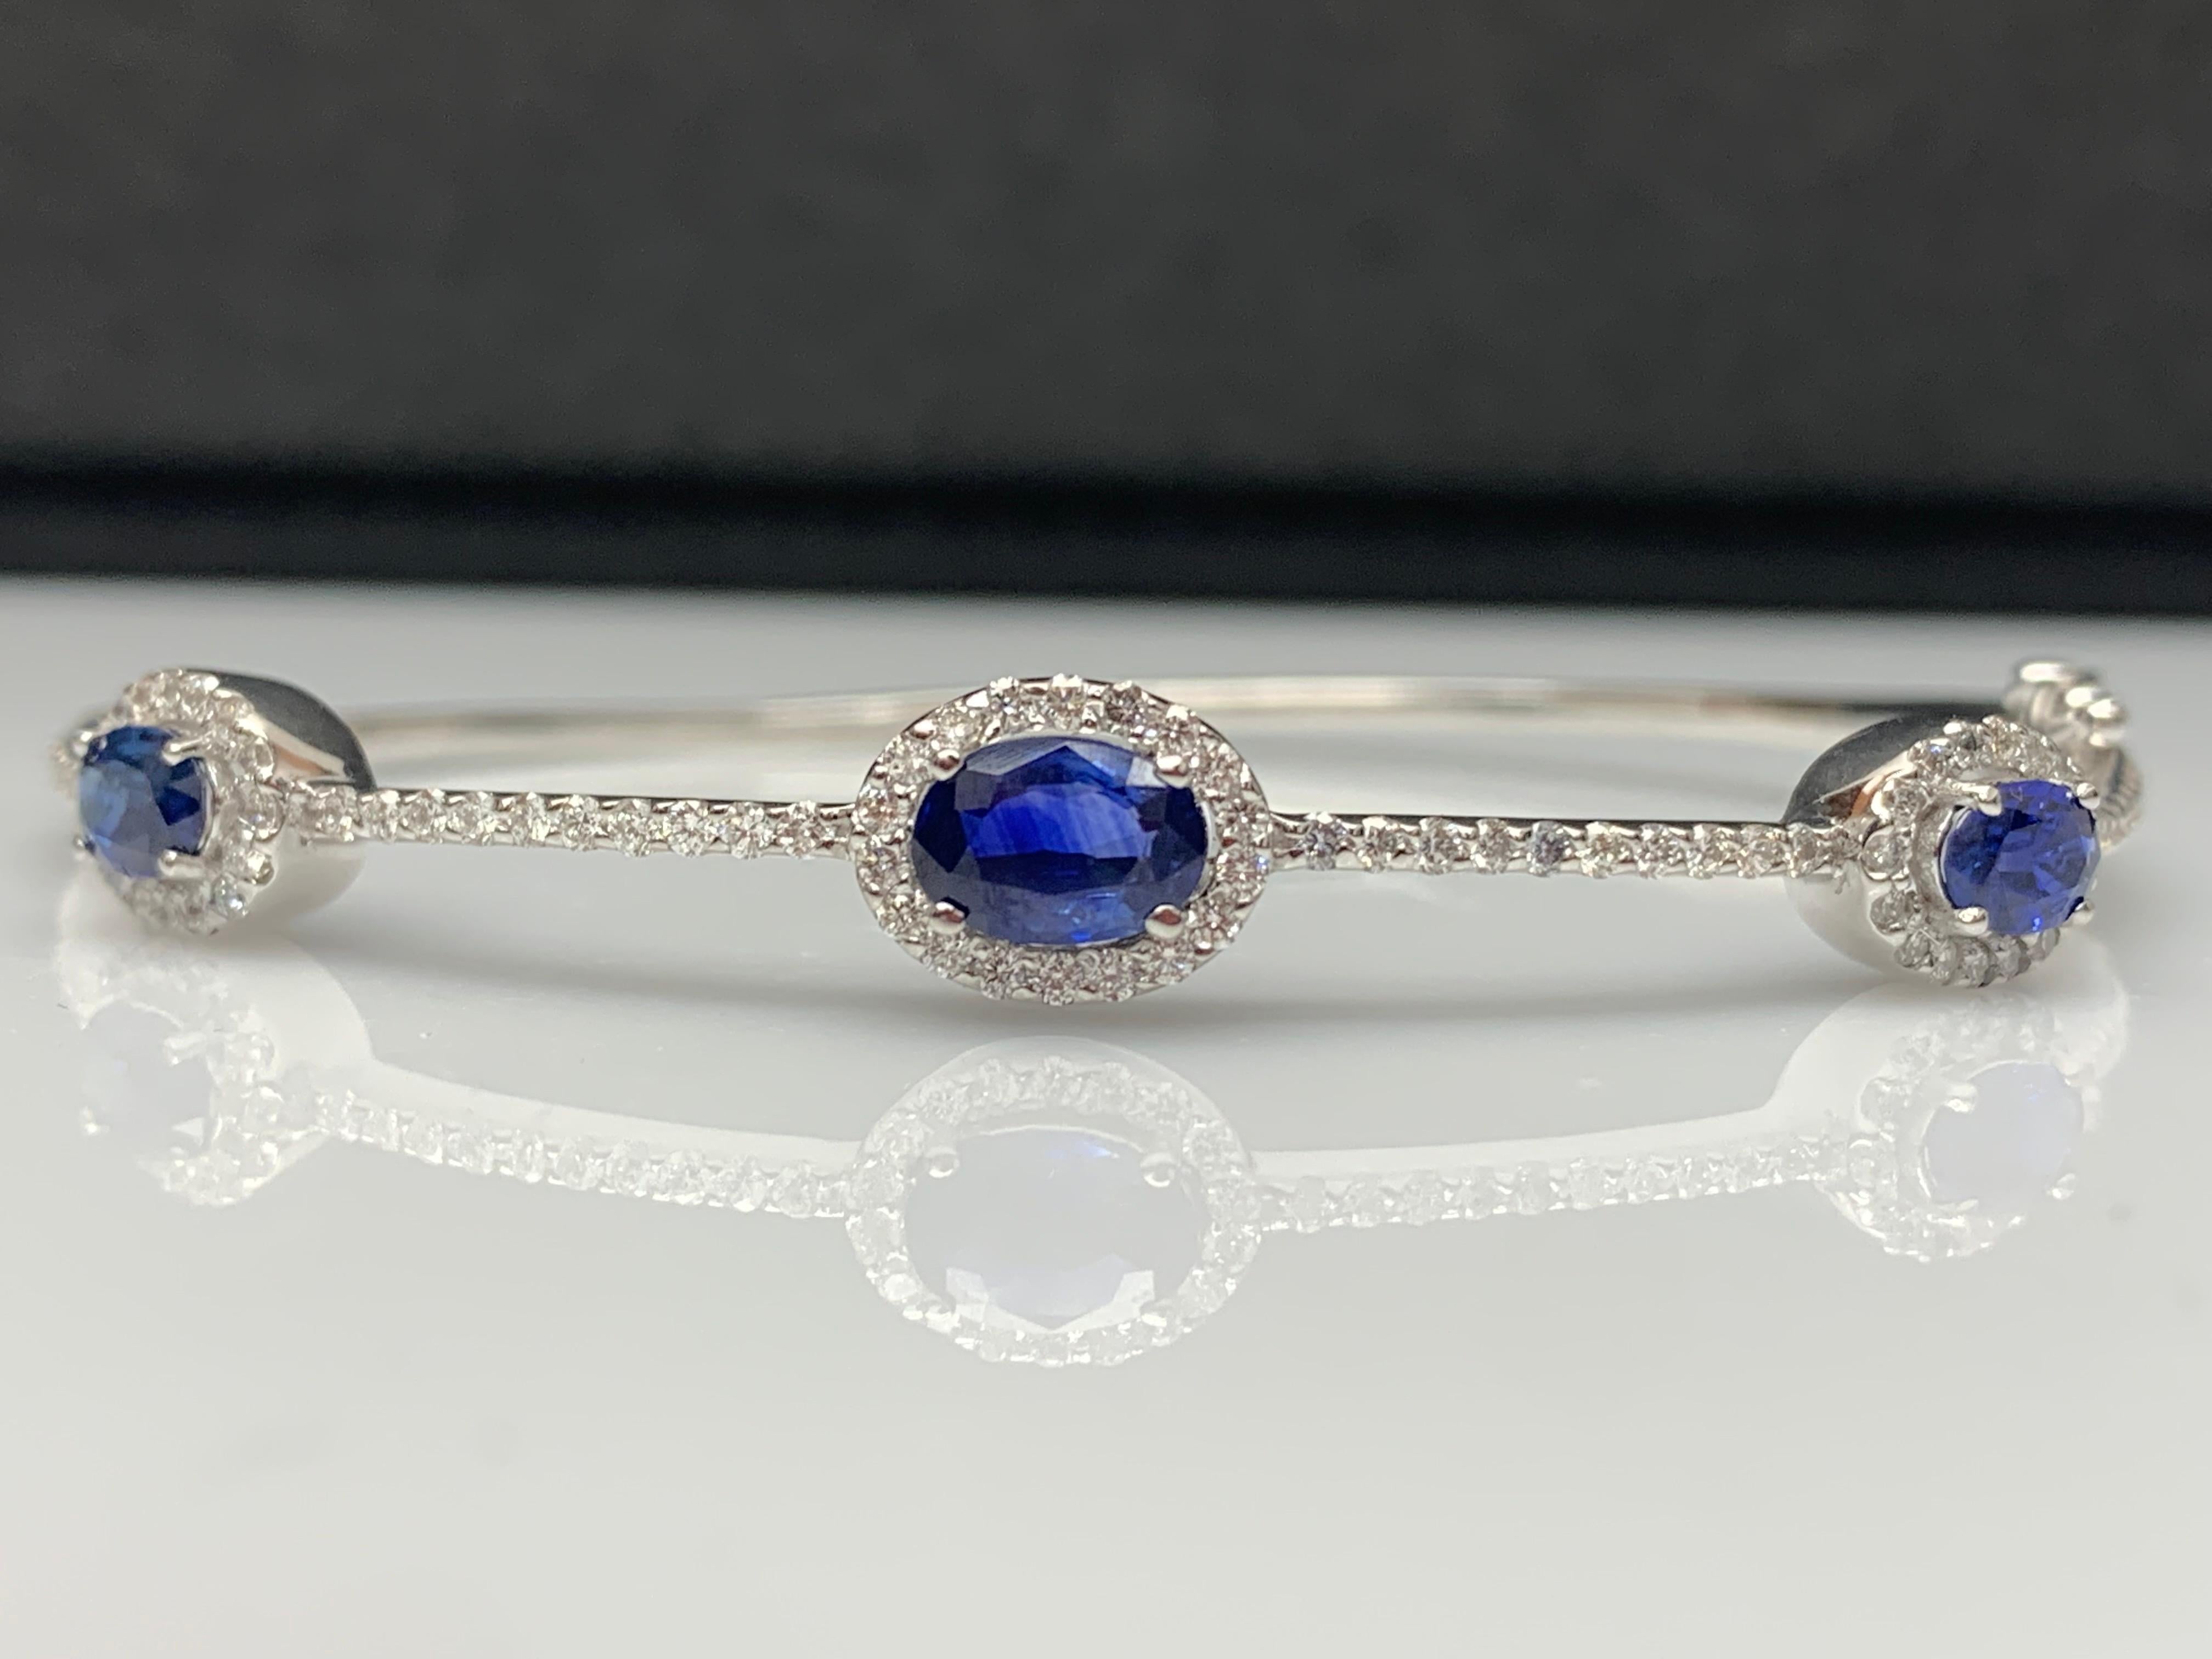 A unique and fashionable Sapphire bangle showcasing 3 oval cut Blue Sapphires weighing 1.80  carat and 90 brilliant diamonds weighing 0.87 carat in total.  Made in 14k white gold.

Style available in different price ranges. Prices are based on your